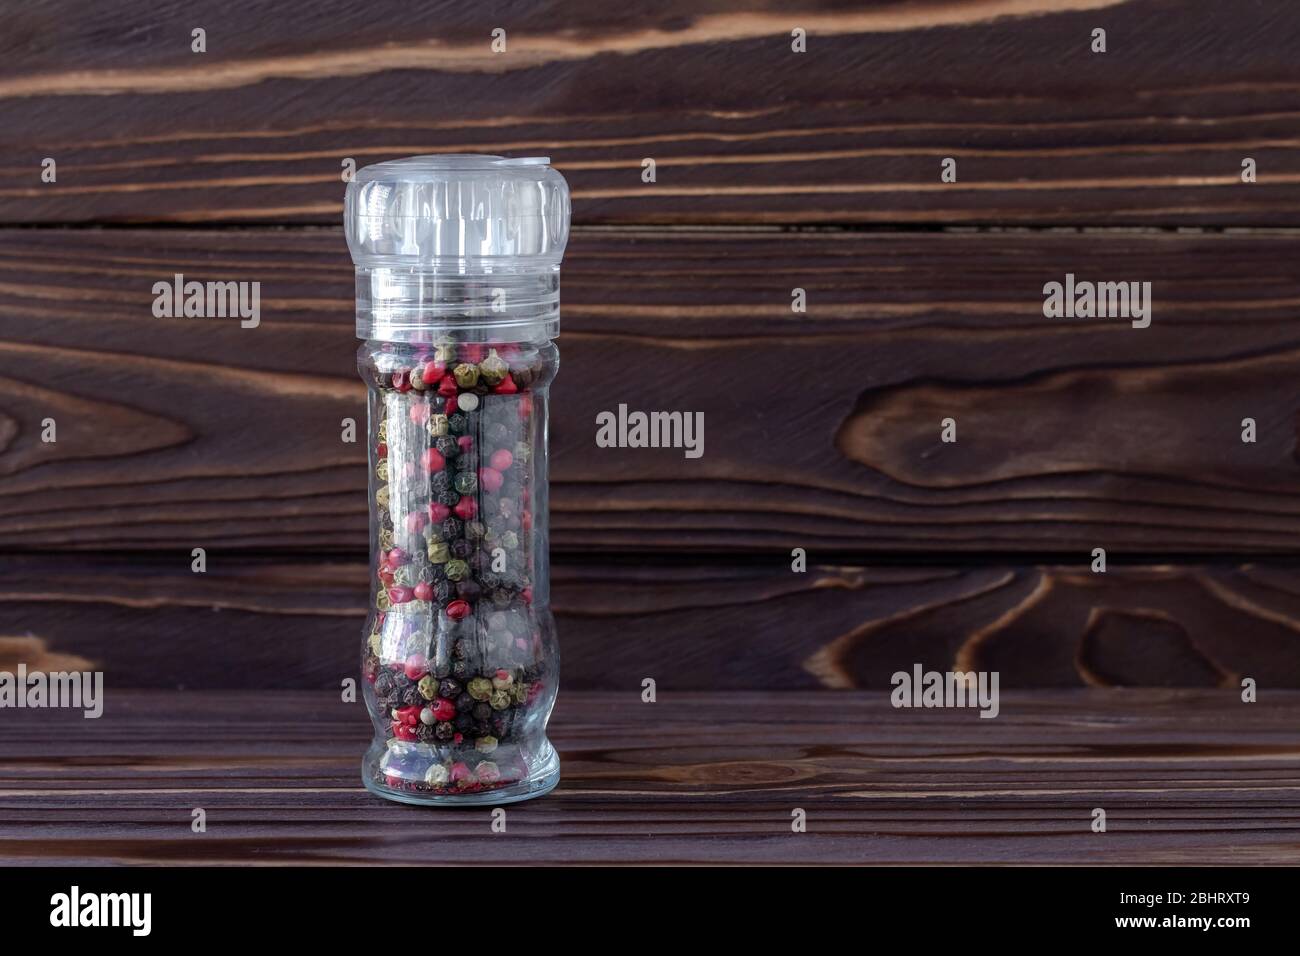 Colorful pepper peas in glass jar on dark brown wooden boards background, multicolored seeds of spicy peppercorn, hot red and black pepper in bottle. Stock Photo